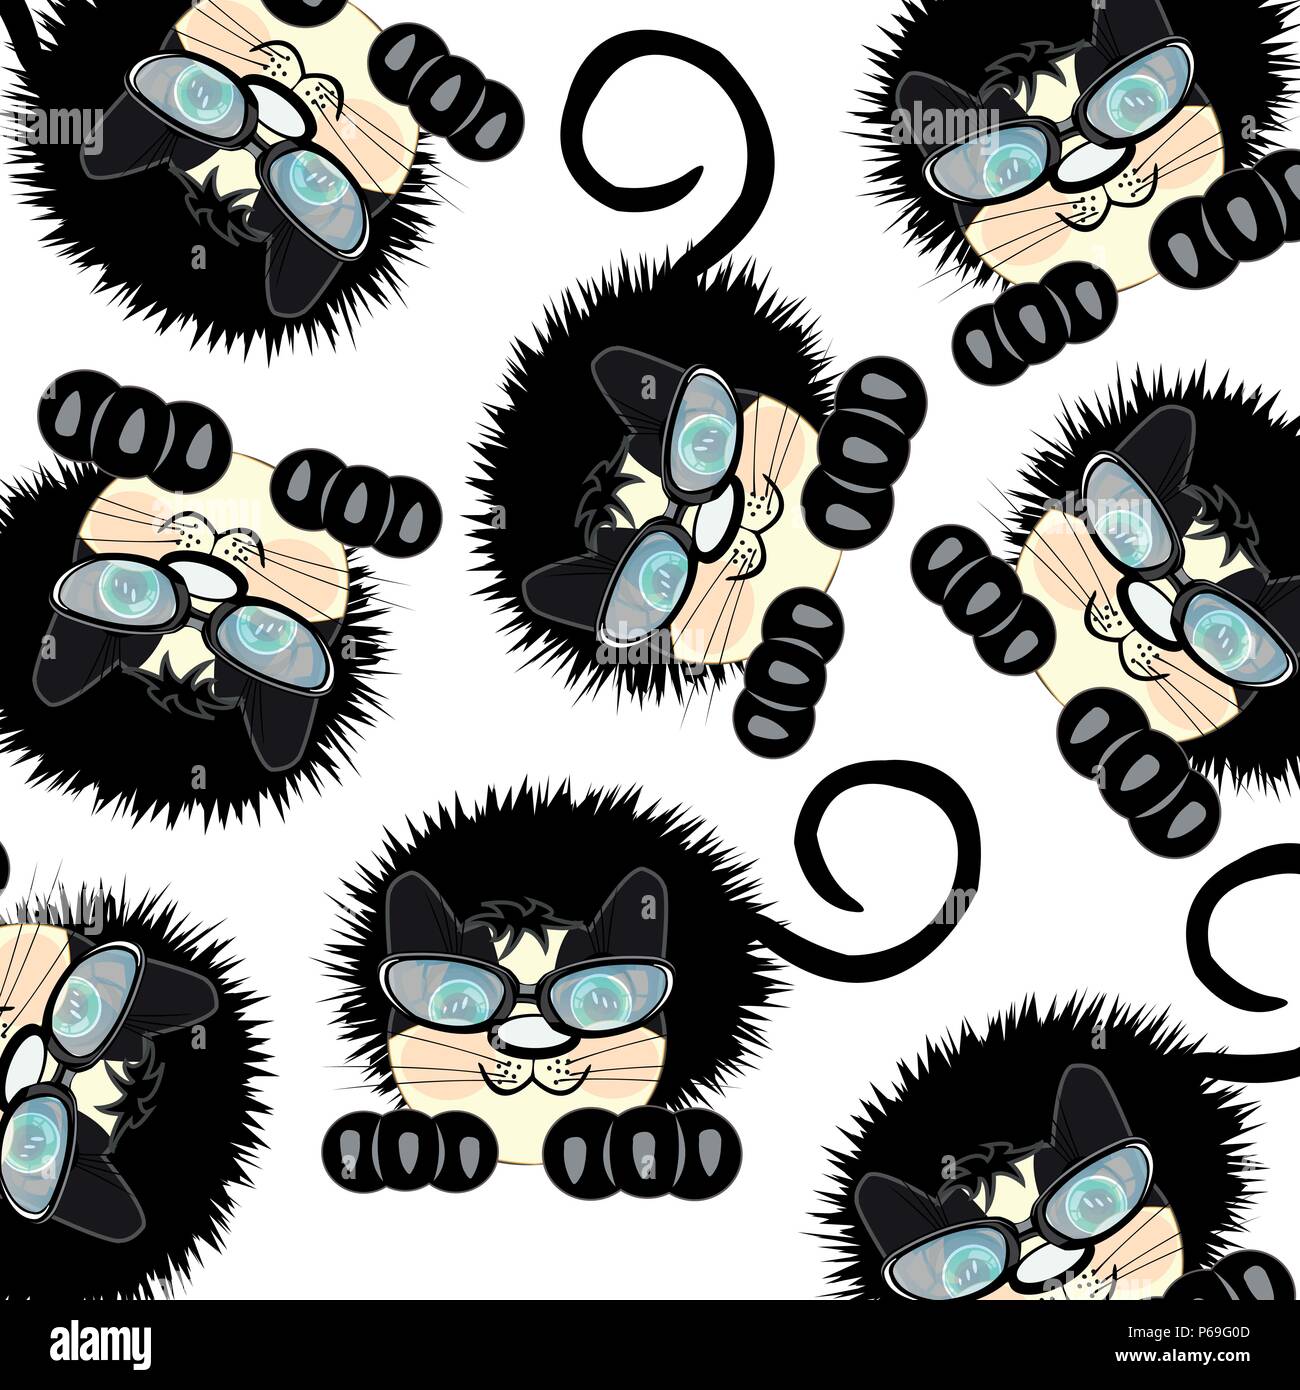 Cat bespectacled pattern Stock Vector